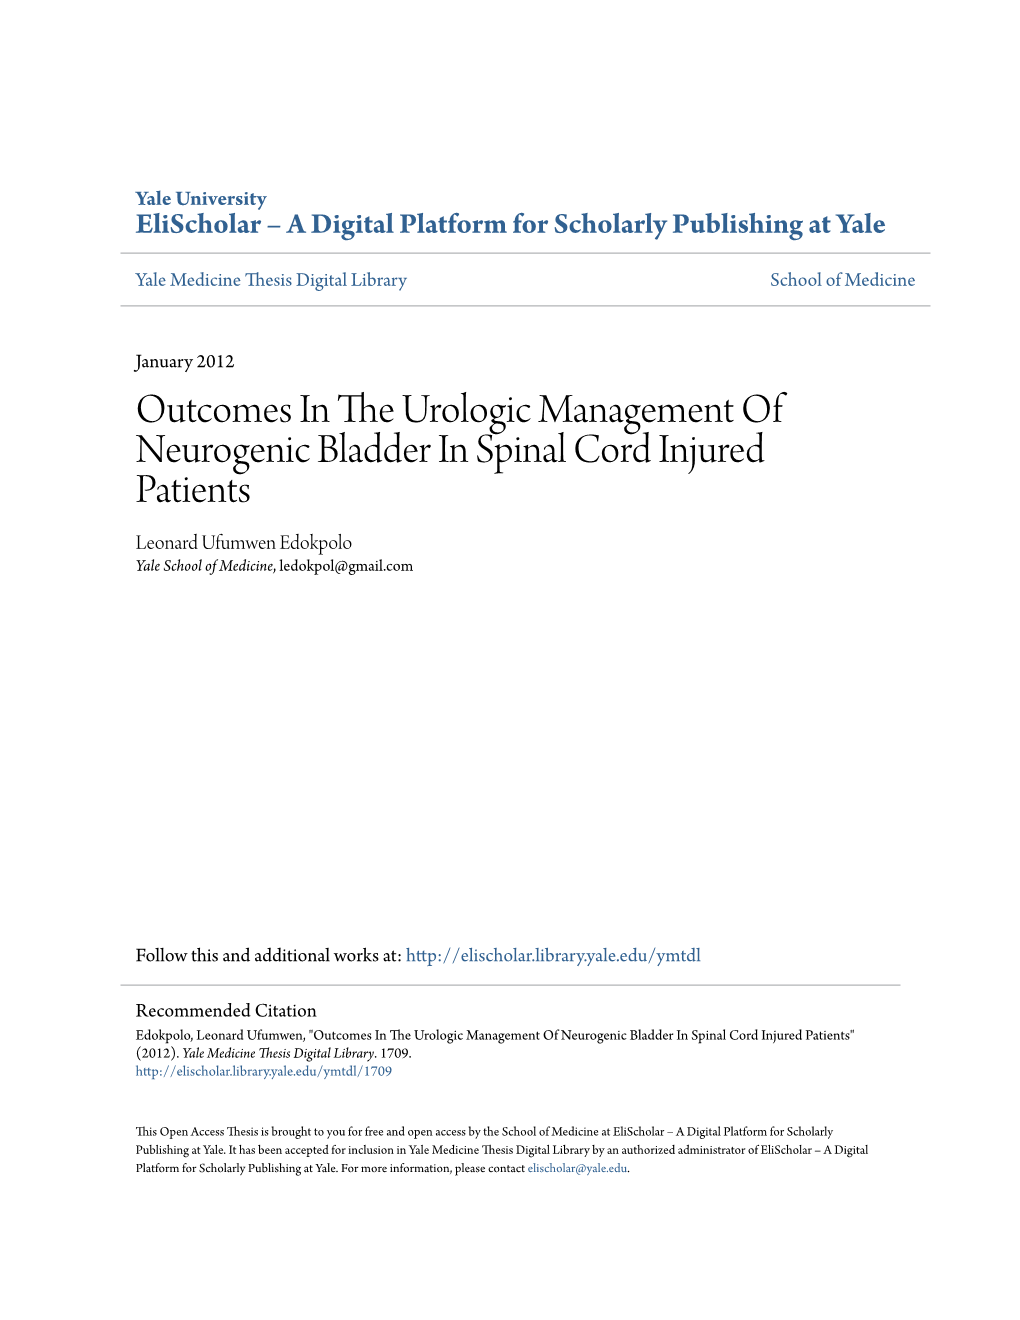 Outcomes in the Urologic Management of Neurogenic Bladder in Spinal Cord Injured Patients